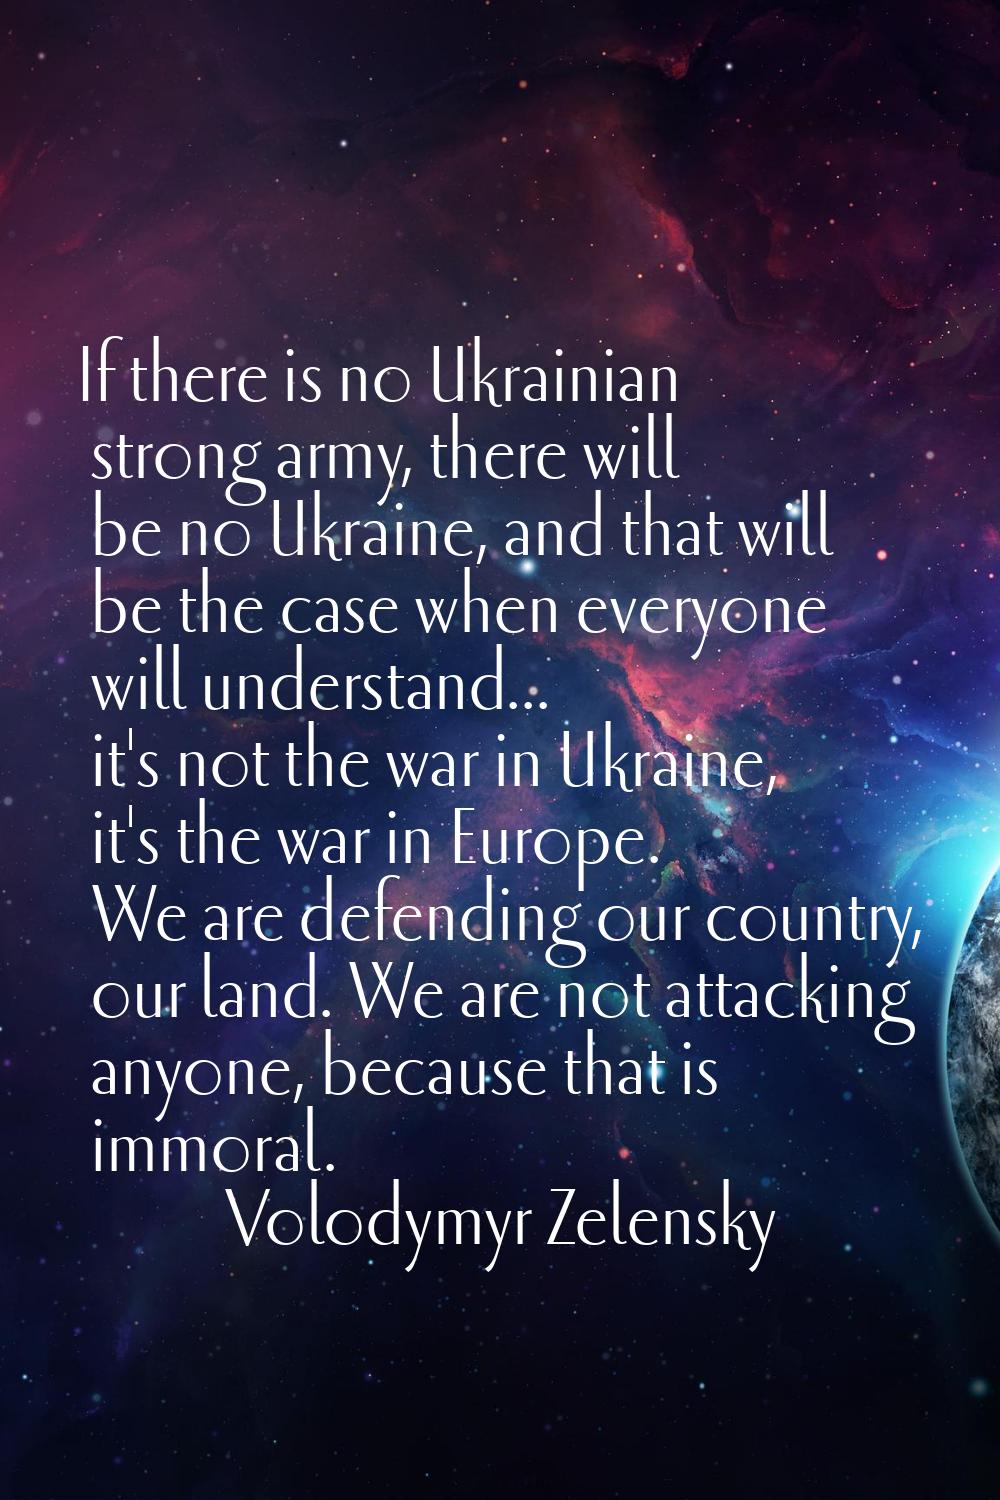 If there is no Ukrainian strong army, there will be no Ukraine, and that will be the case when ever